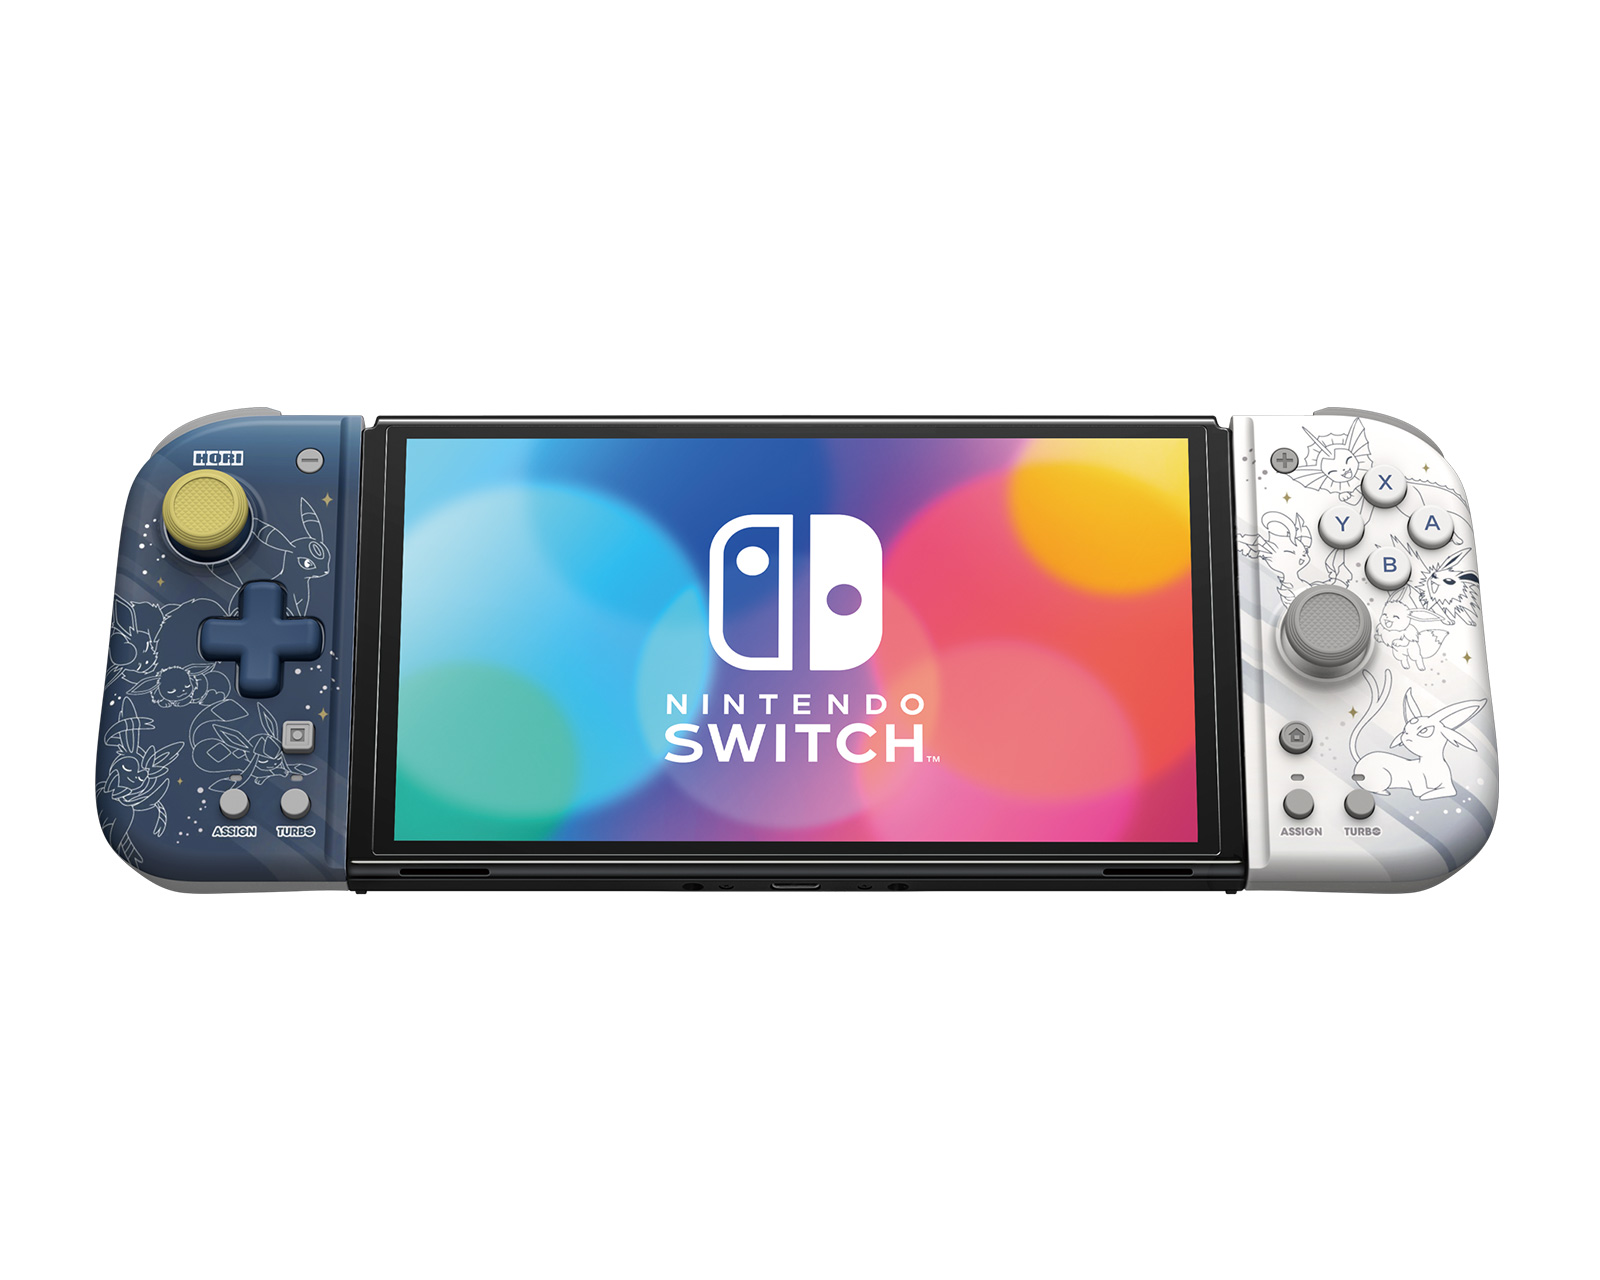 Nintendo Switch Split Pad Pro (Teal) Ergonomic Controller for Handheld Mode  by HORI - Officially Licensed By Nintendo 